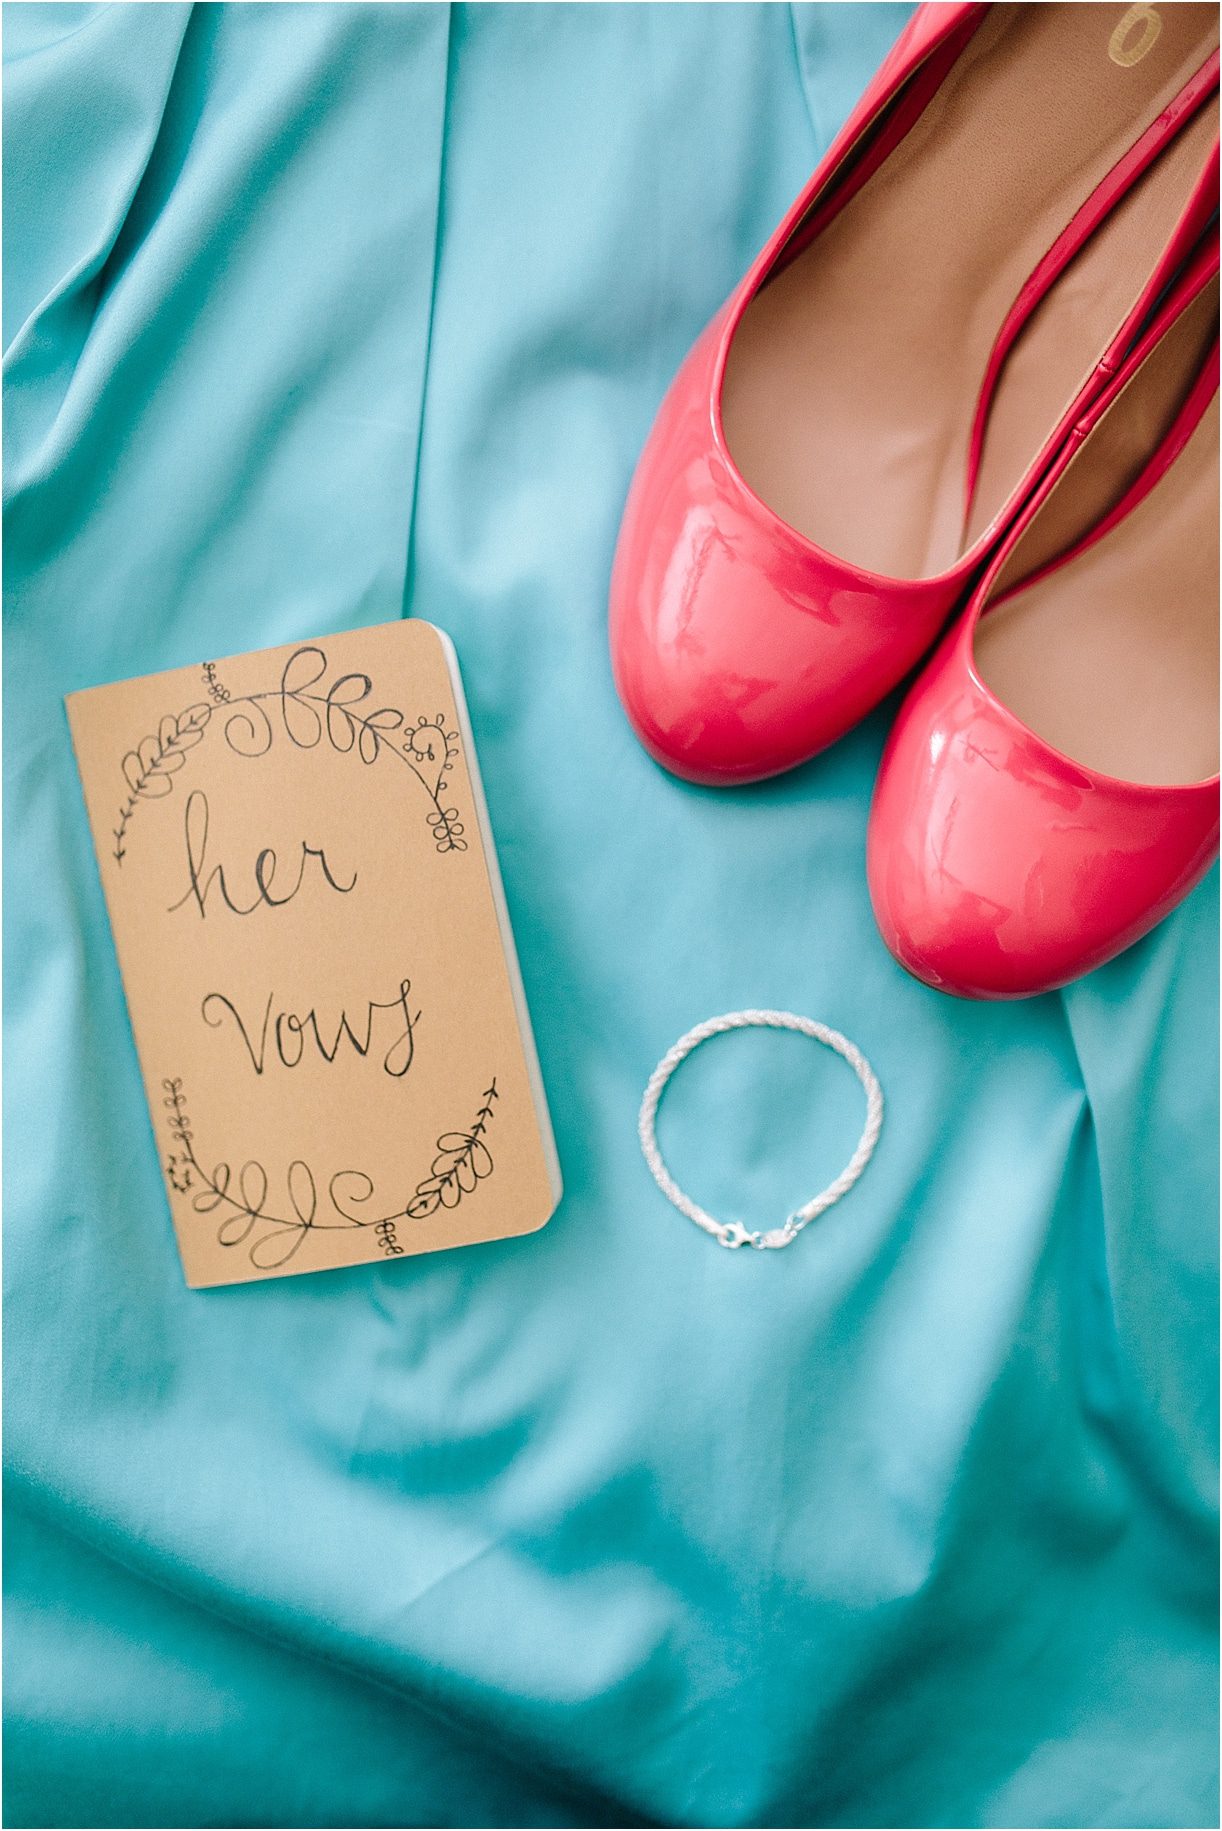 A Pink and Aqua Roanoke Virginia Wedding as seen on Hill City Bride Blog and Magazine - shoes, details